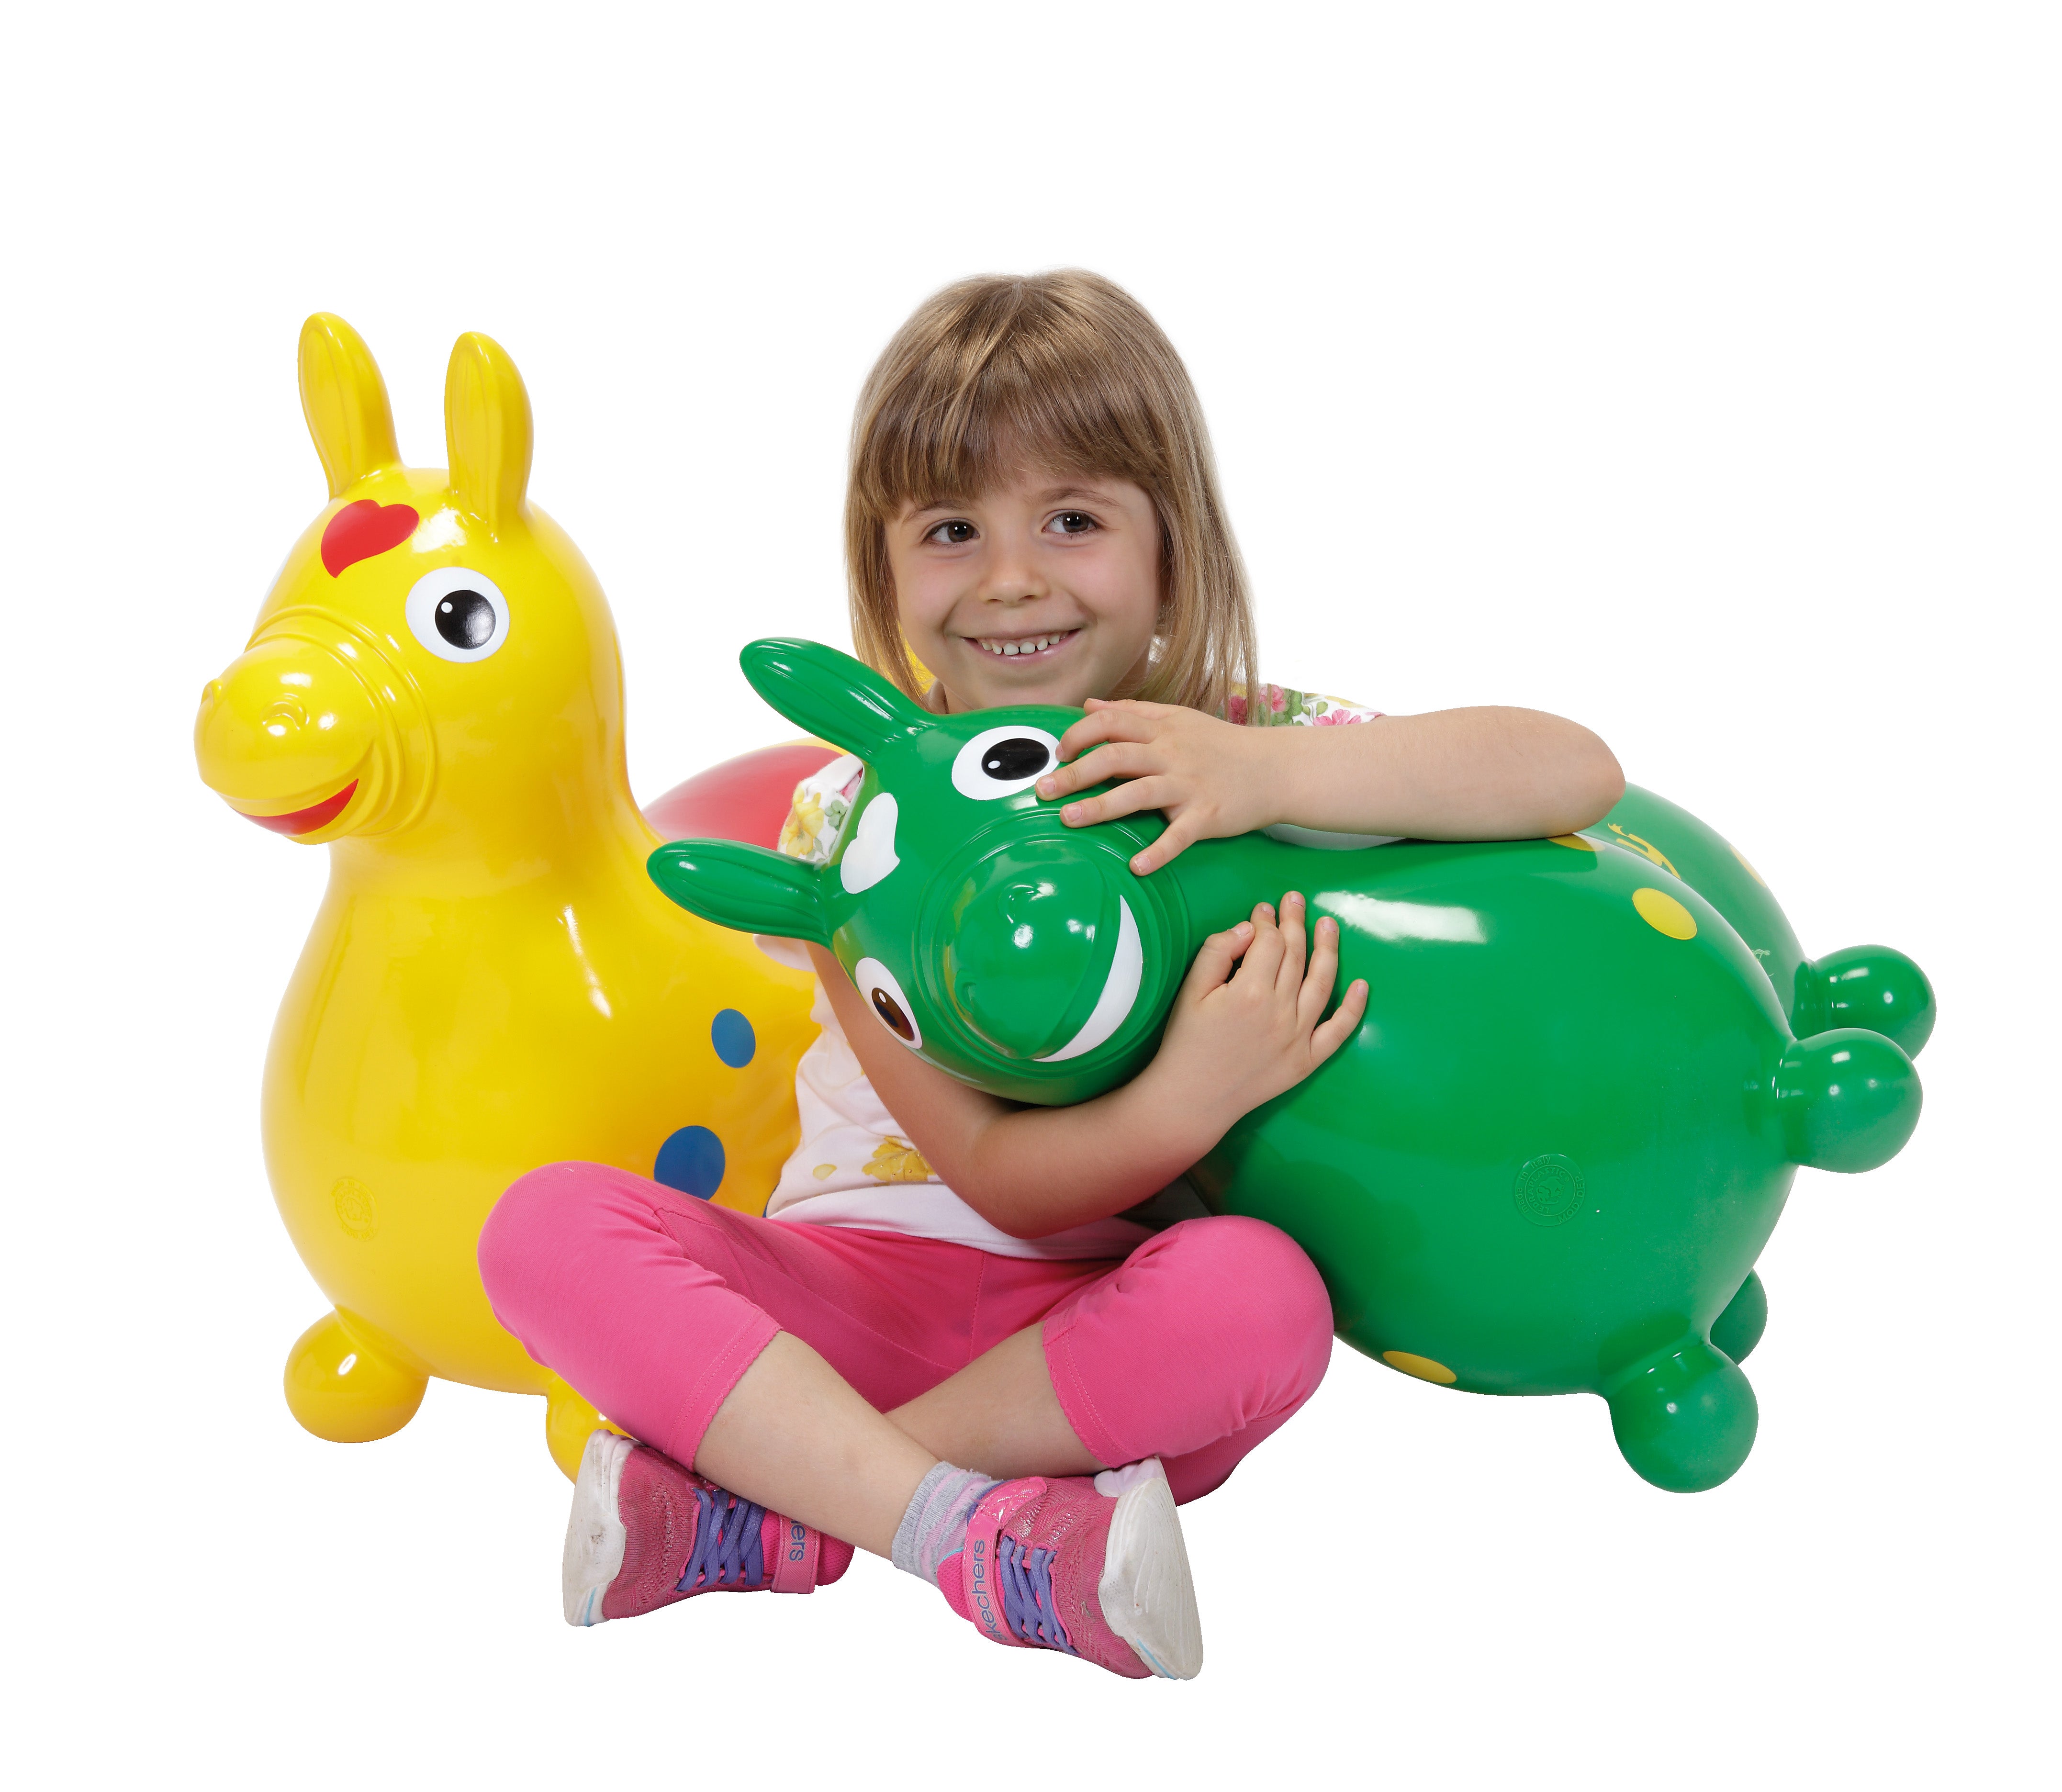 The Rody Inflatable Bounce Horse promotes active playtime while developing children’s balance, motor skills and body coordination. The Rody Horse has been adopted in many nursery schools as a psycho-motor tool, and also used by therapists to enhance language, memory, and perception skills. However, it's mainly a fun and relaxing toy to get your child active.